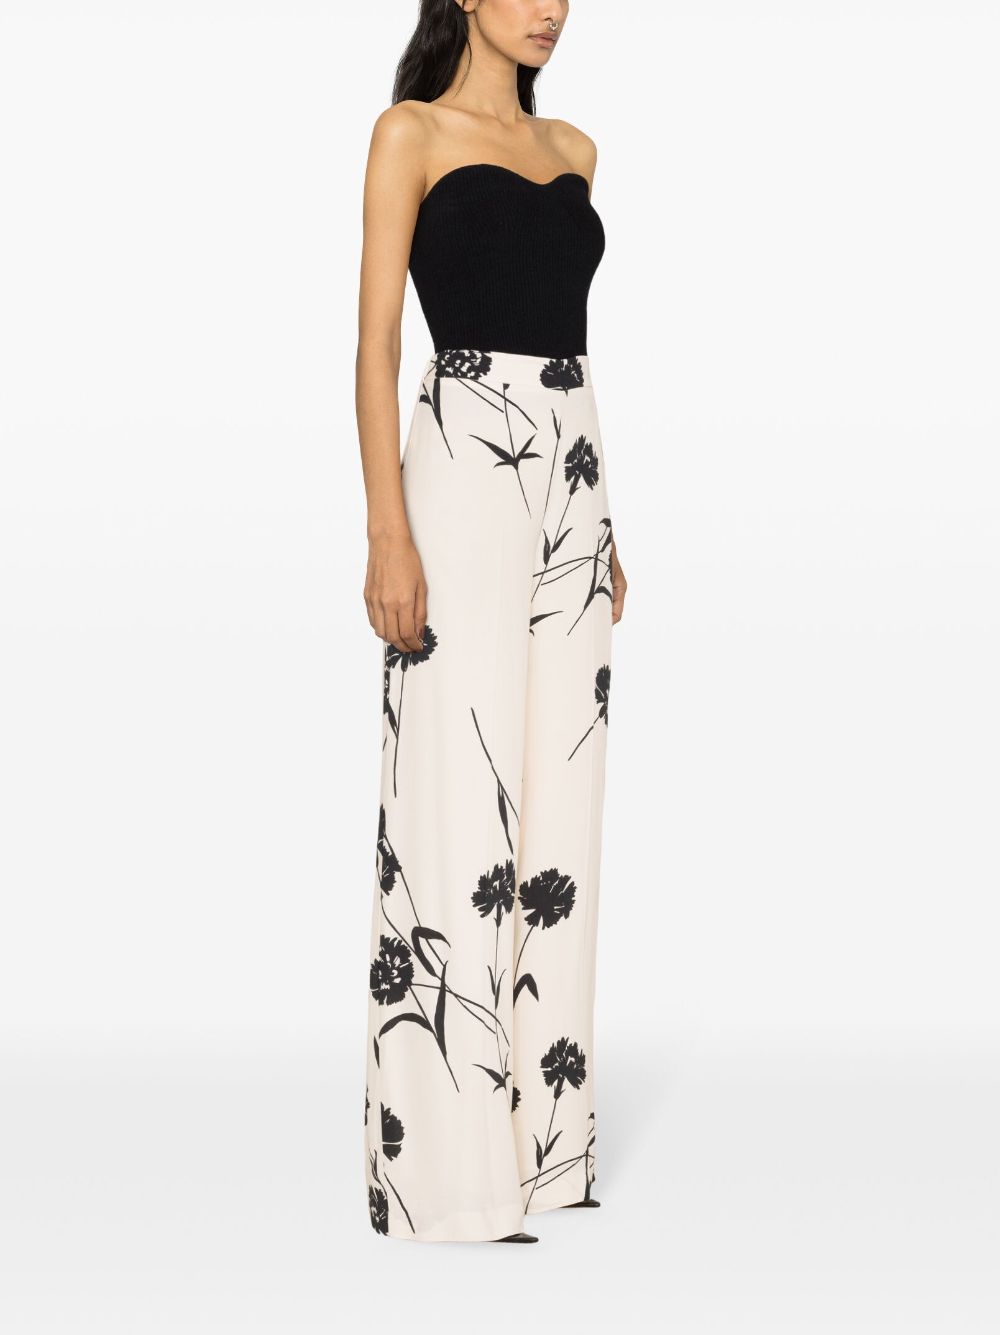 Floral print trousers